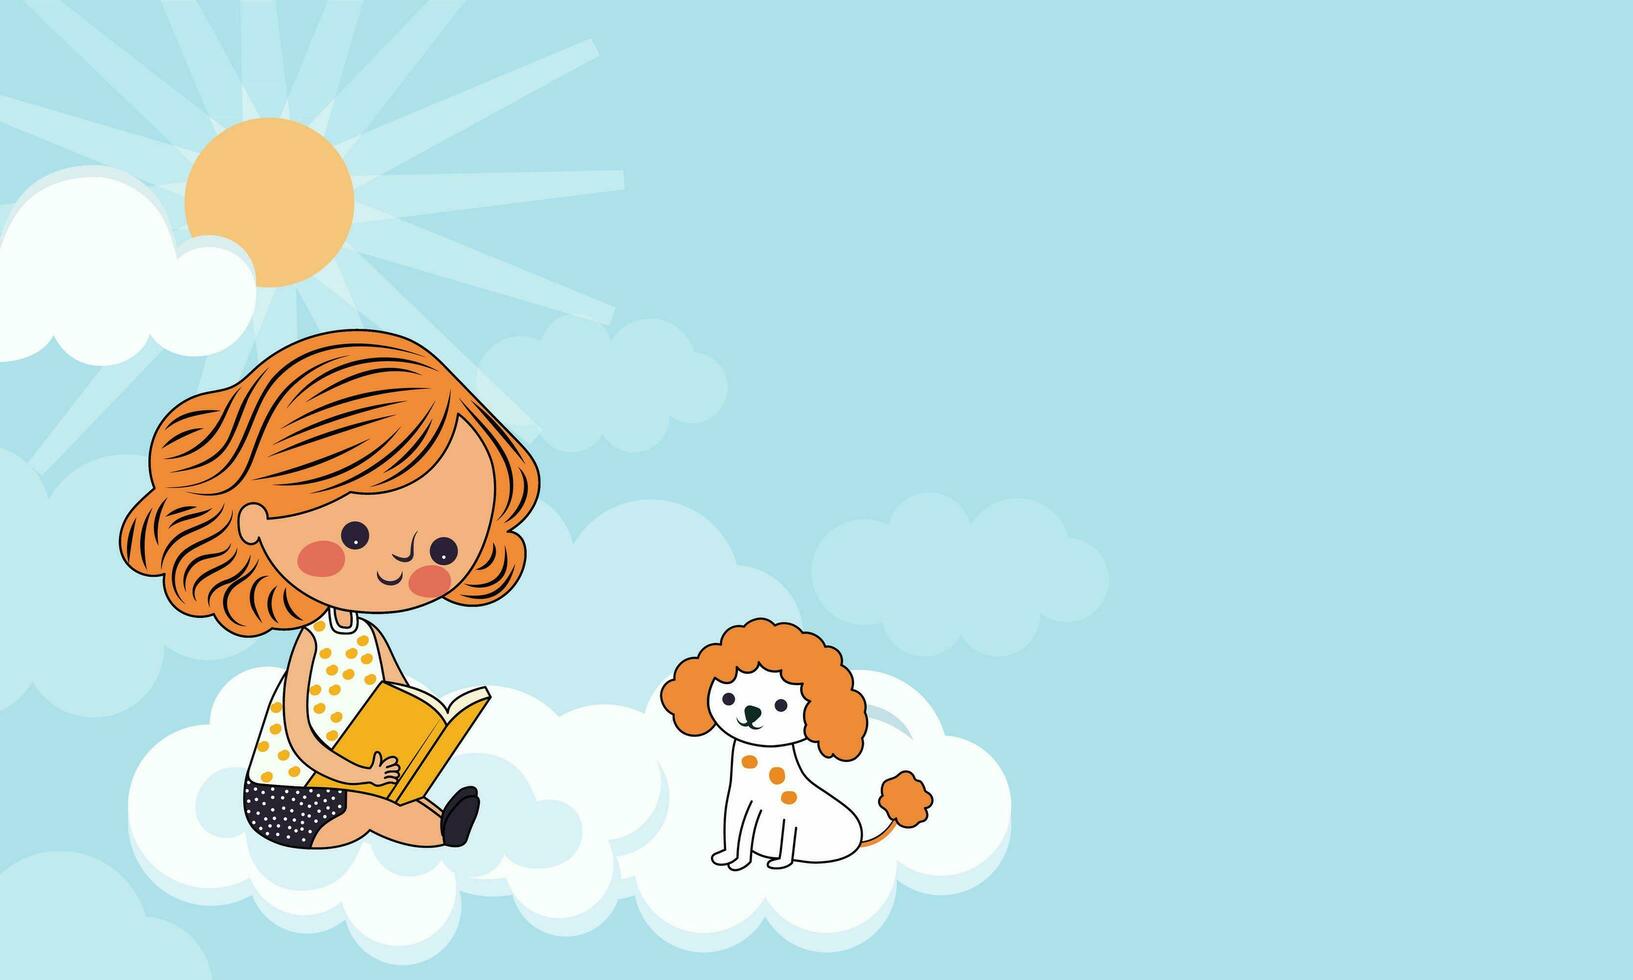 Modern Girl Character Reading Book Near Cartoon Dog Sitting, Clouds On Sunny Blue Background And Copy Space. vector